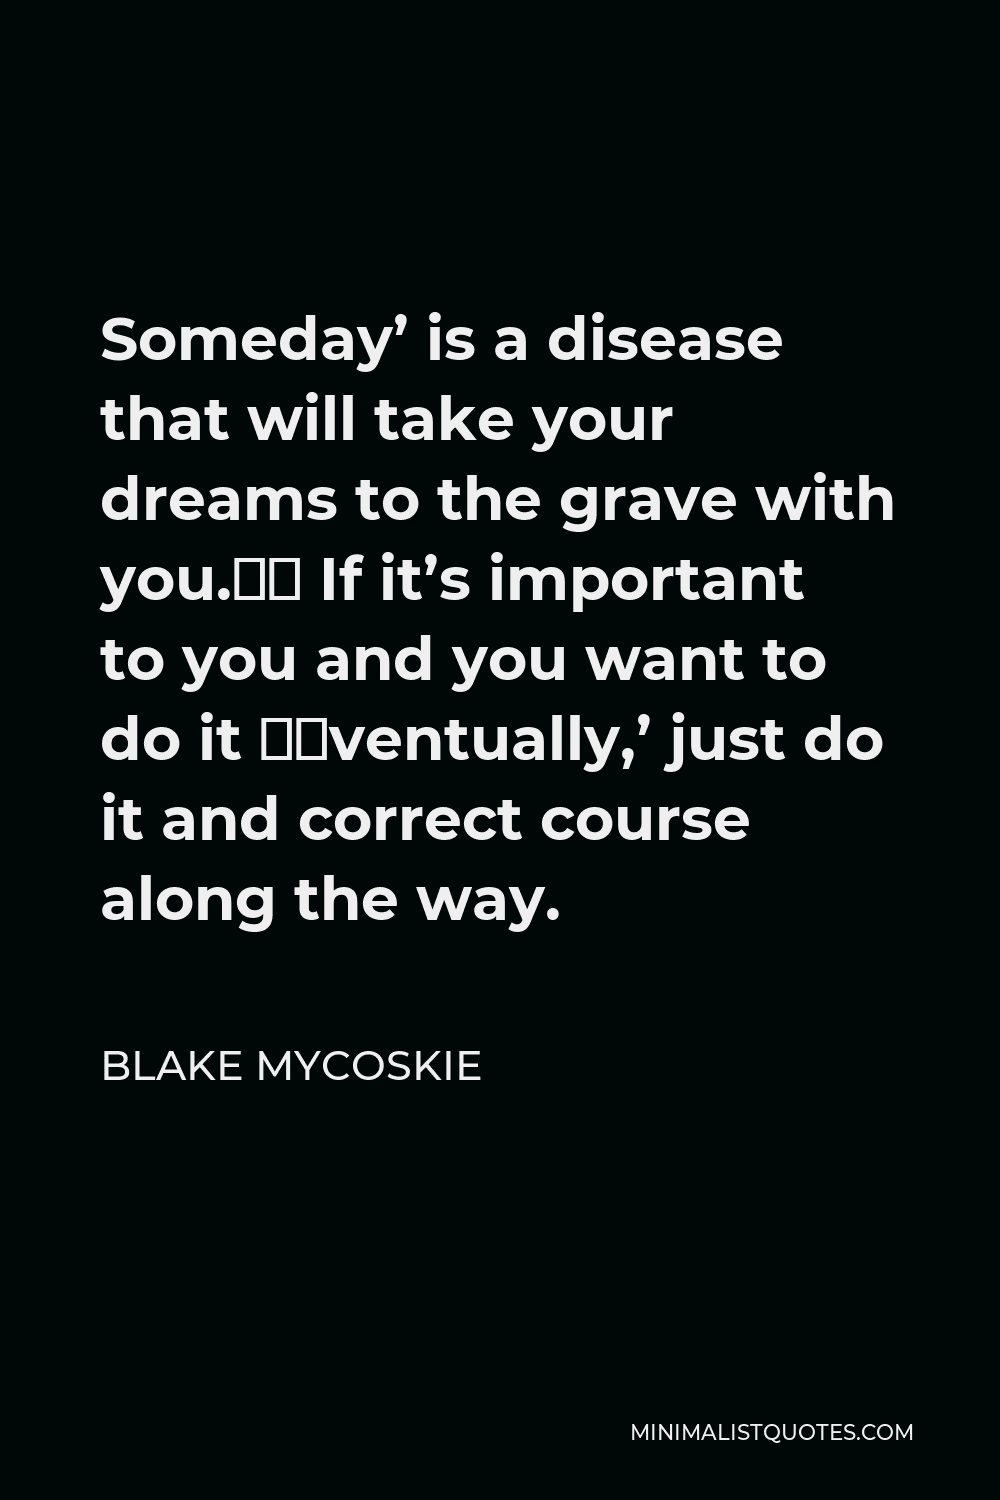 Blake Mycoskie Quote - Someday’ is a disease that will take your dreams to the grave with you.… If it’s important to you and you want to do it ‘eventually,’ just do it and correct course along the way.